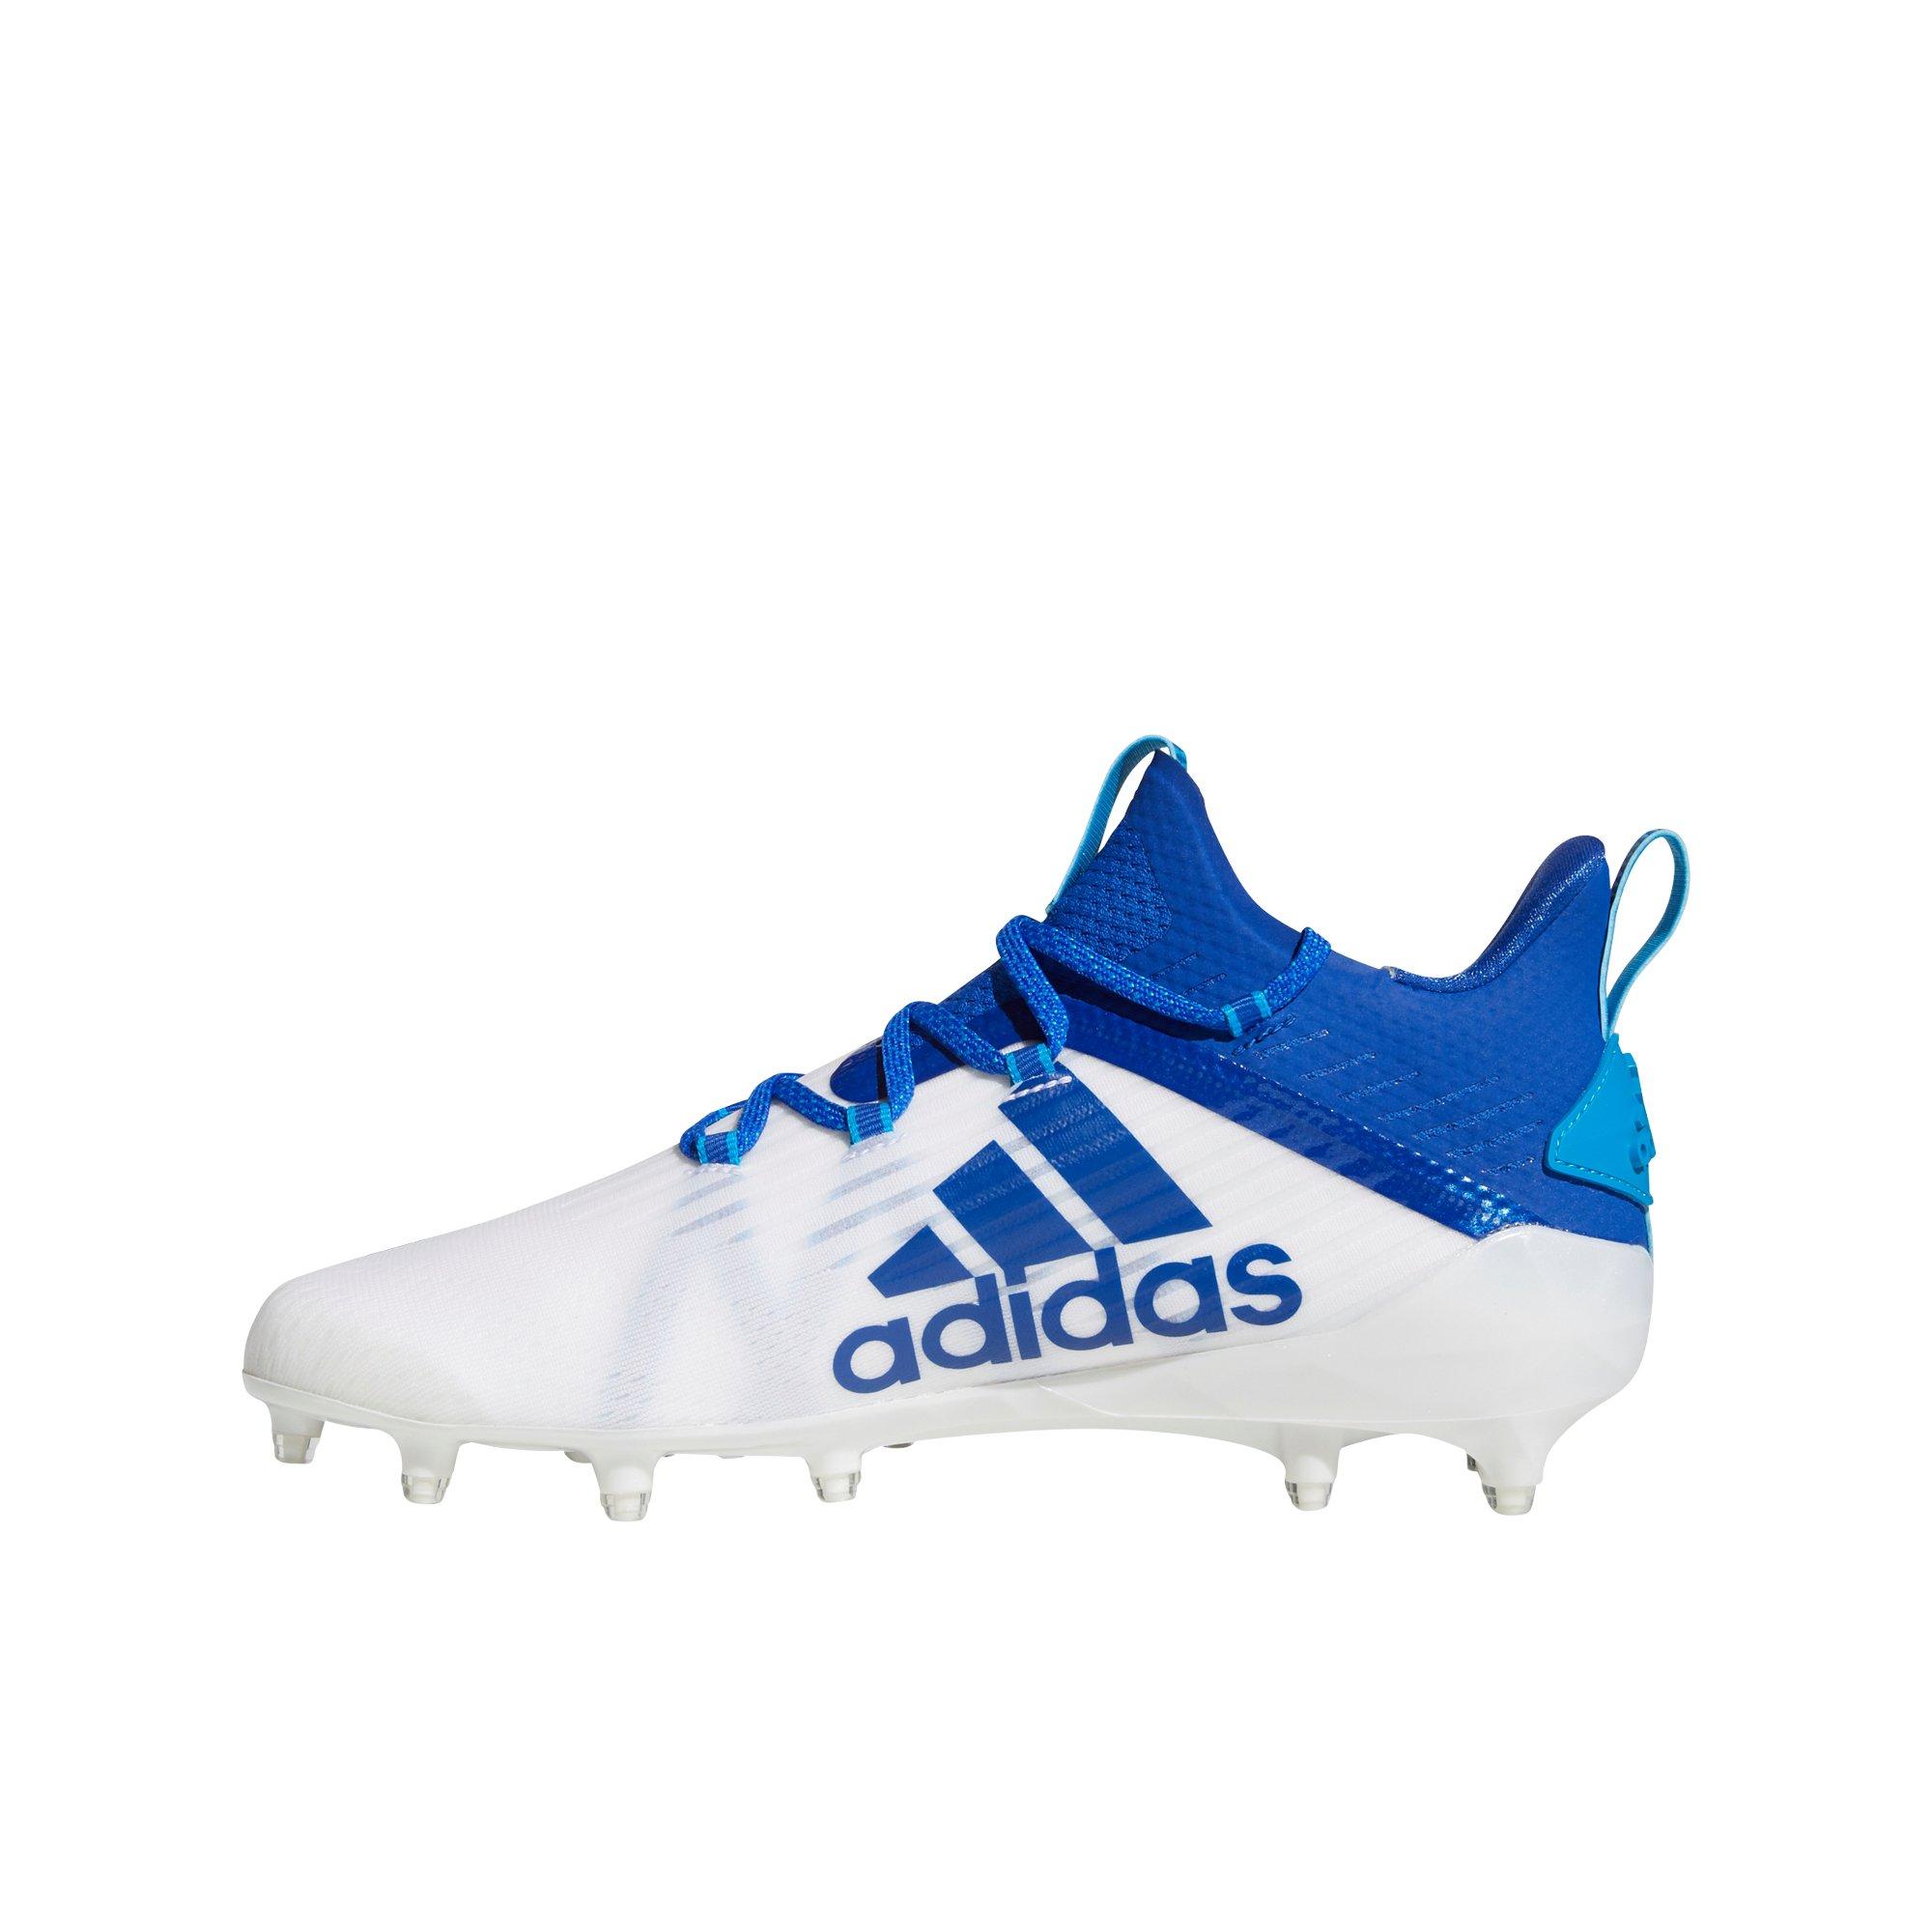 blue and white football cleats